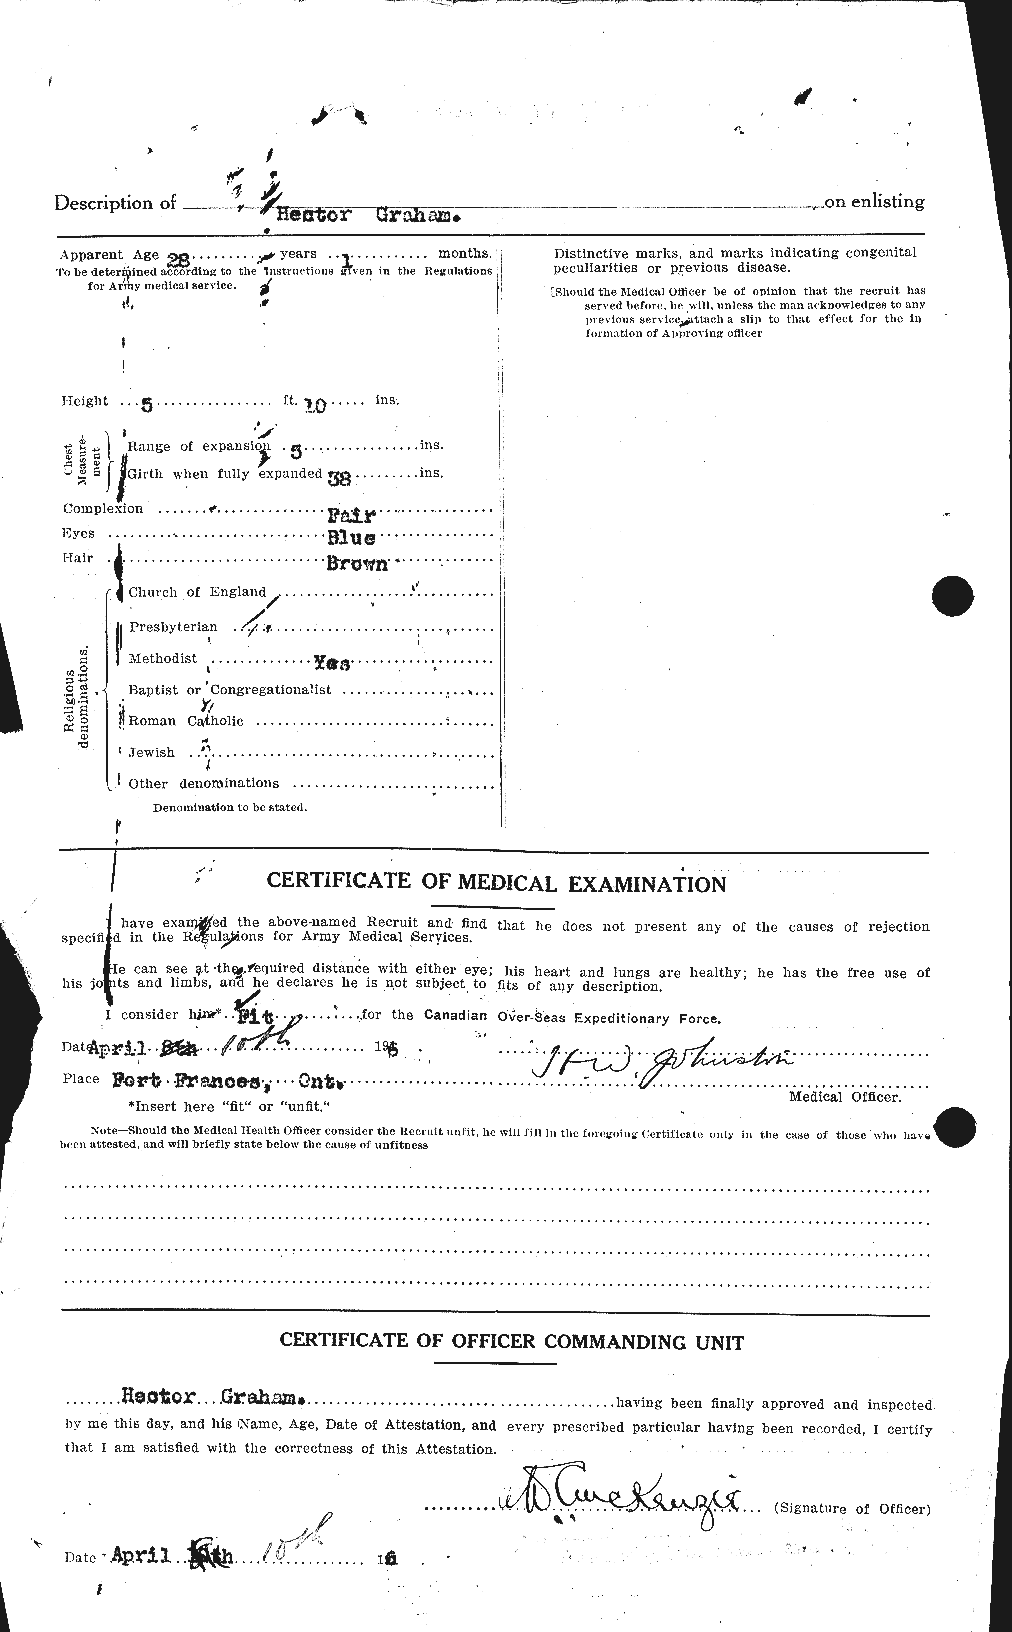 Personnel Records of the First World War - CEF 357731b